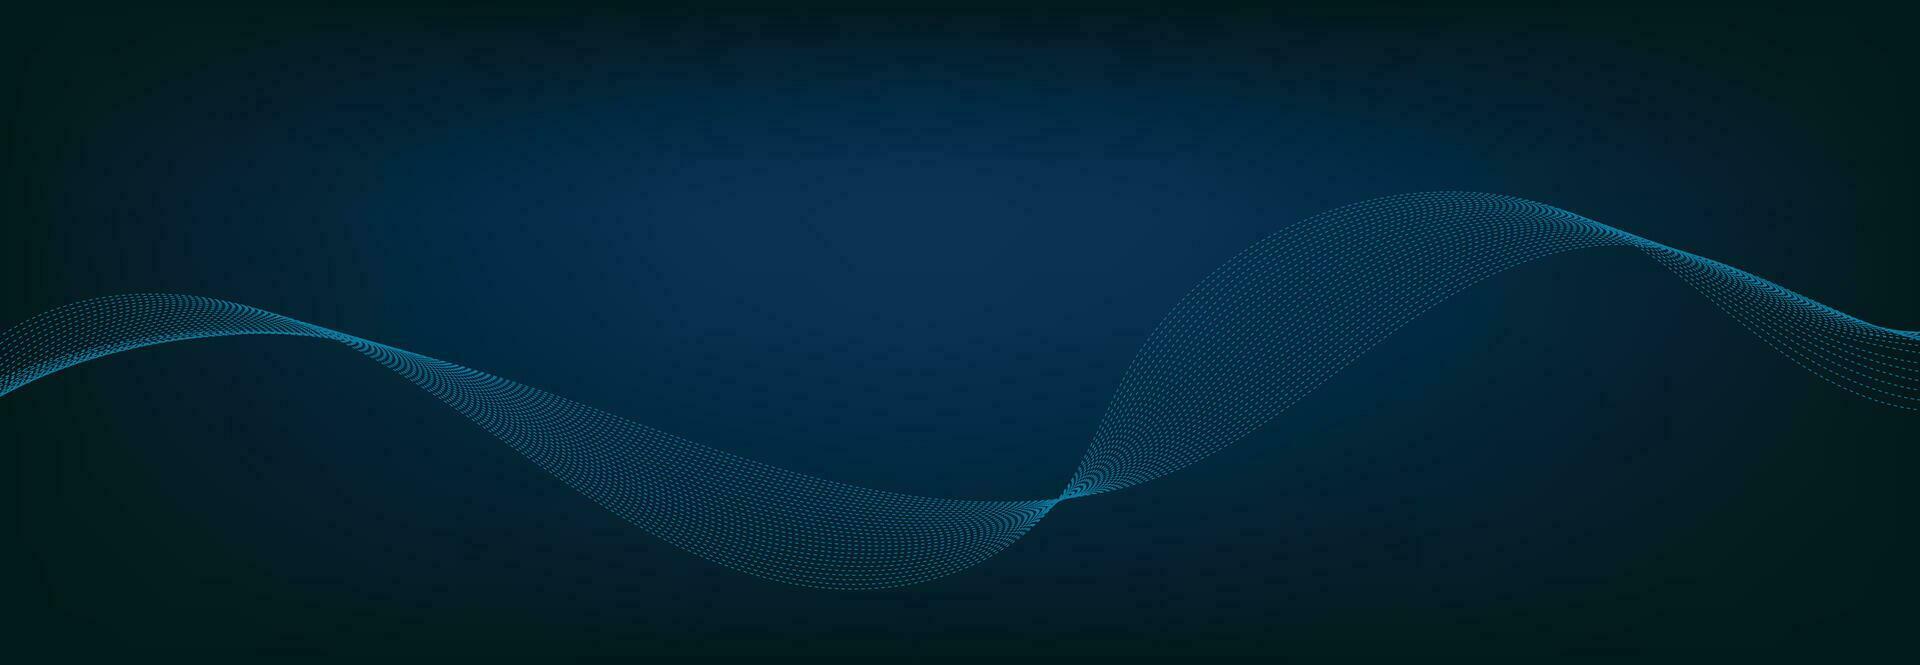 Abstract Banner Template with Blue wavy lines. Technology Banner. vector